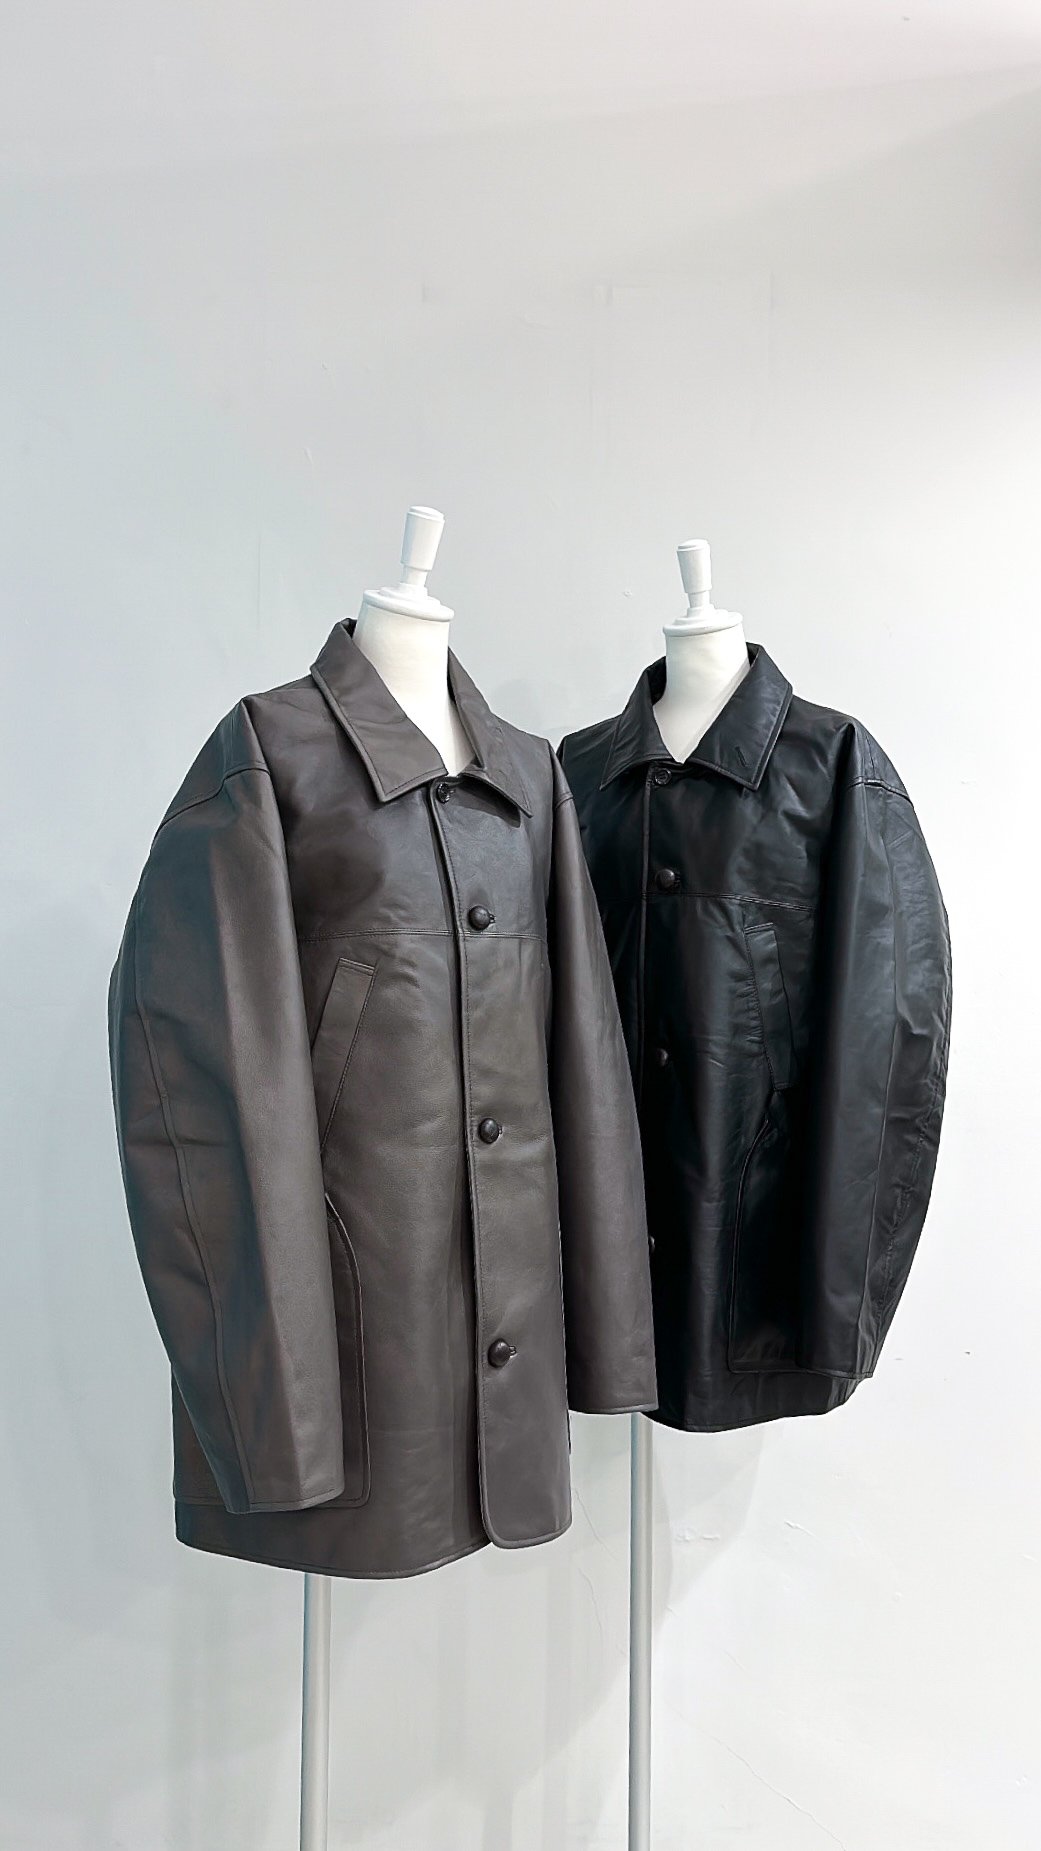 <img class='new_mark_img1' src='https://img.shop-pro.jp/img/new/icons20.gif' style='border:none;display:inline;margin:0px;padding:0px;width:auto;' />CAR CLUB COAT -Cow Hide Leather-